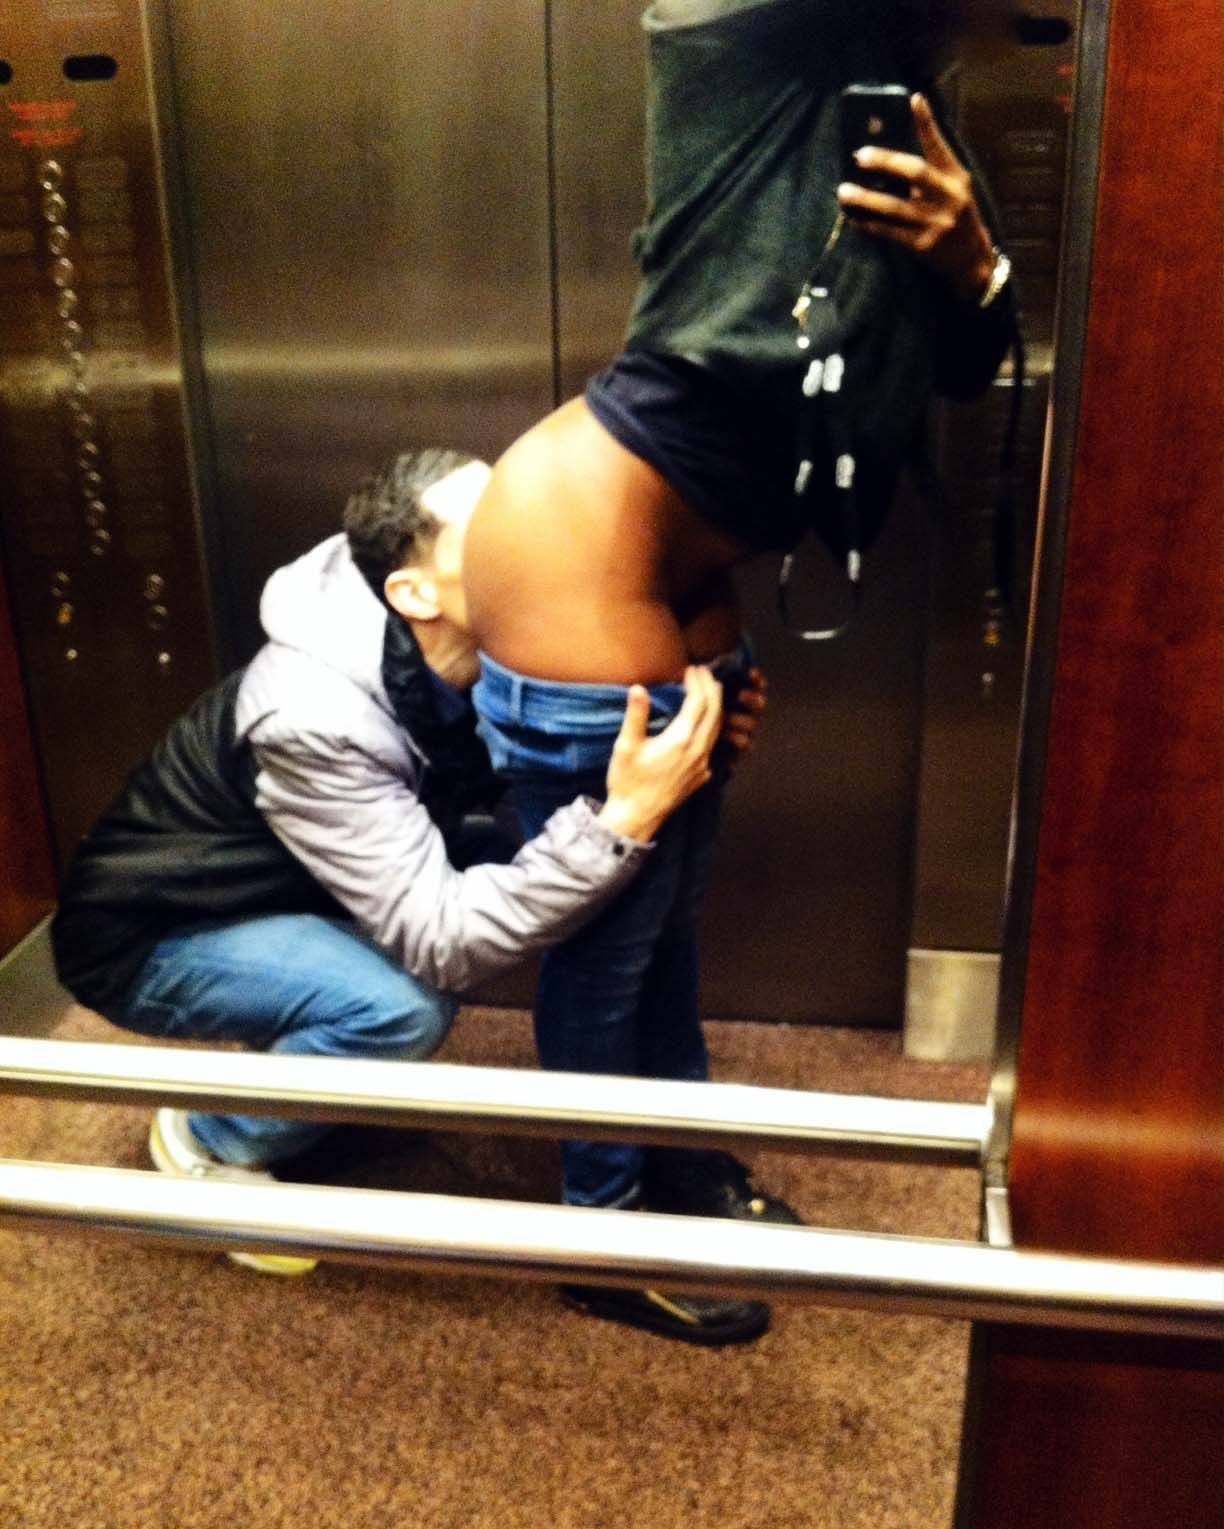 Amateur Pussy Lick - Amateur porn: Amateur pussy licking in the elevator.